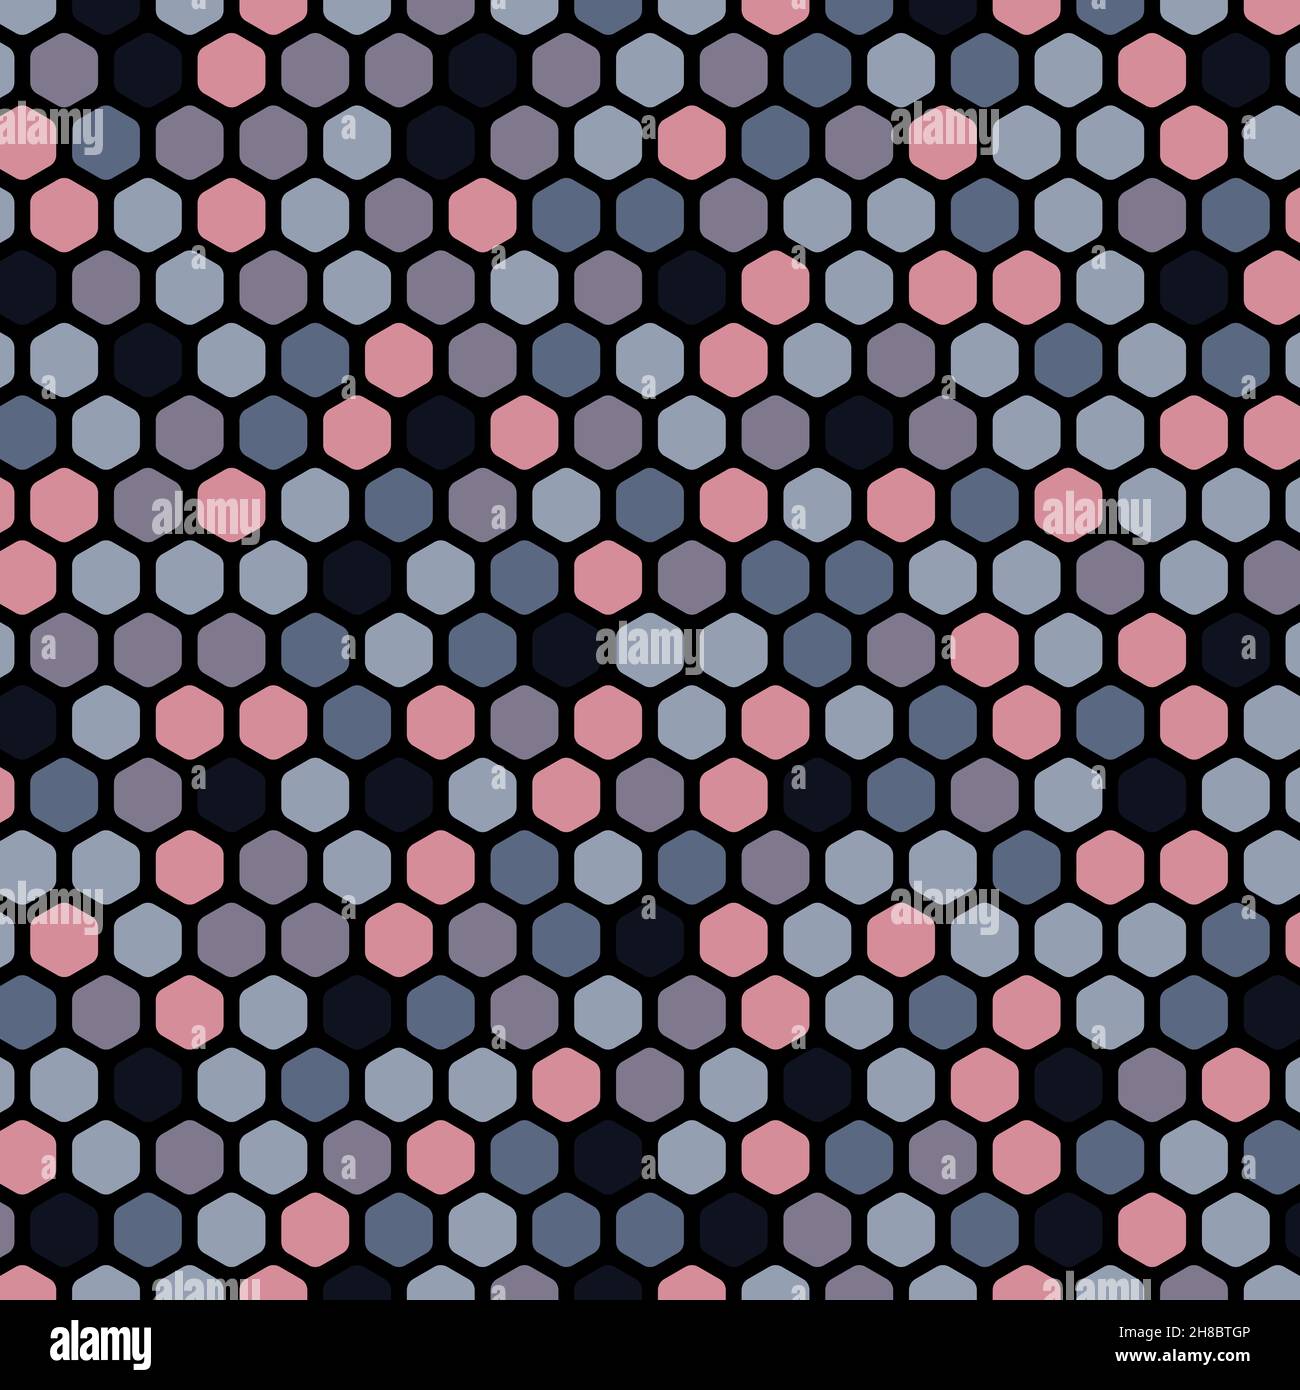 Abstract hexagonal pattern design overlapping design artwork decorative. Cover style of minimal background. Illustration vector Stock Vector